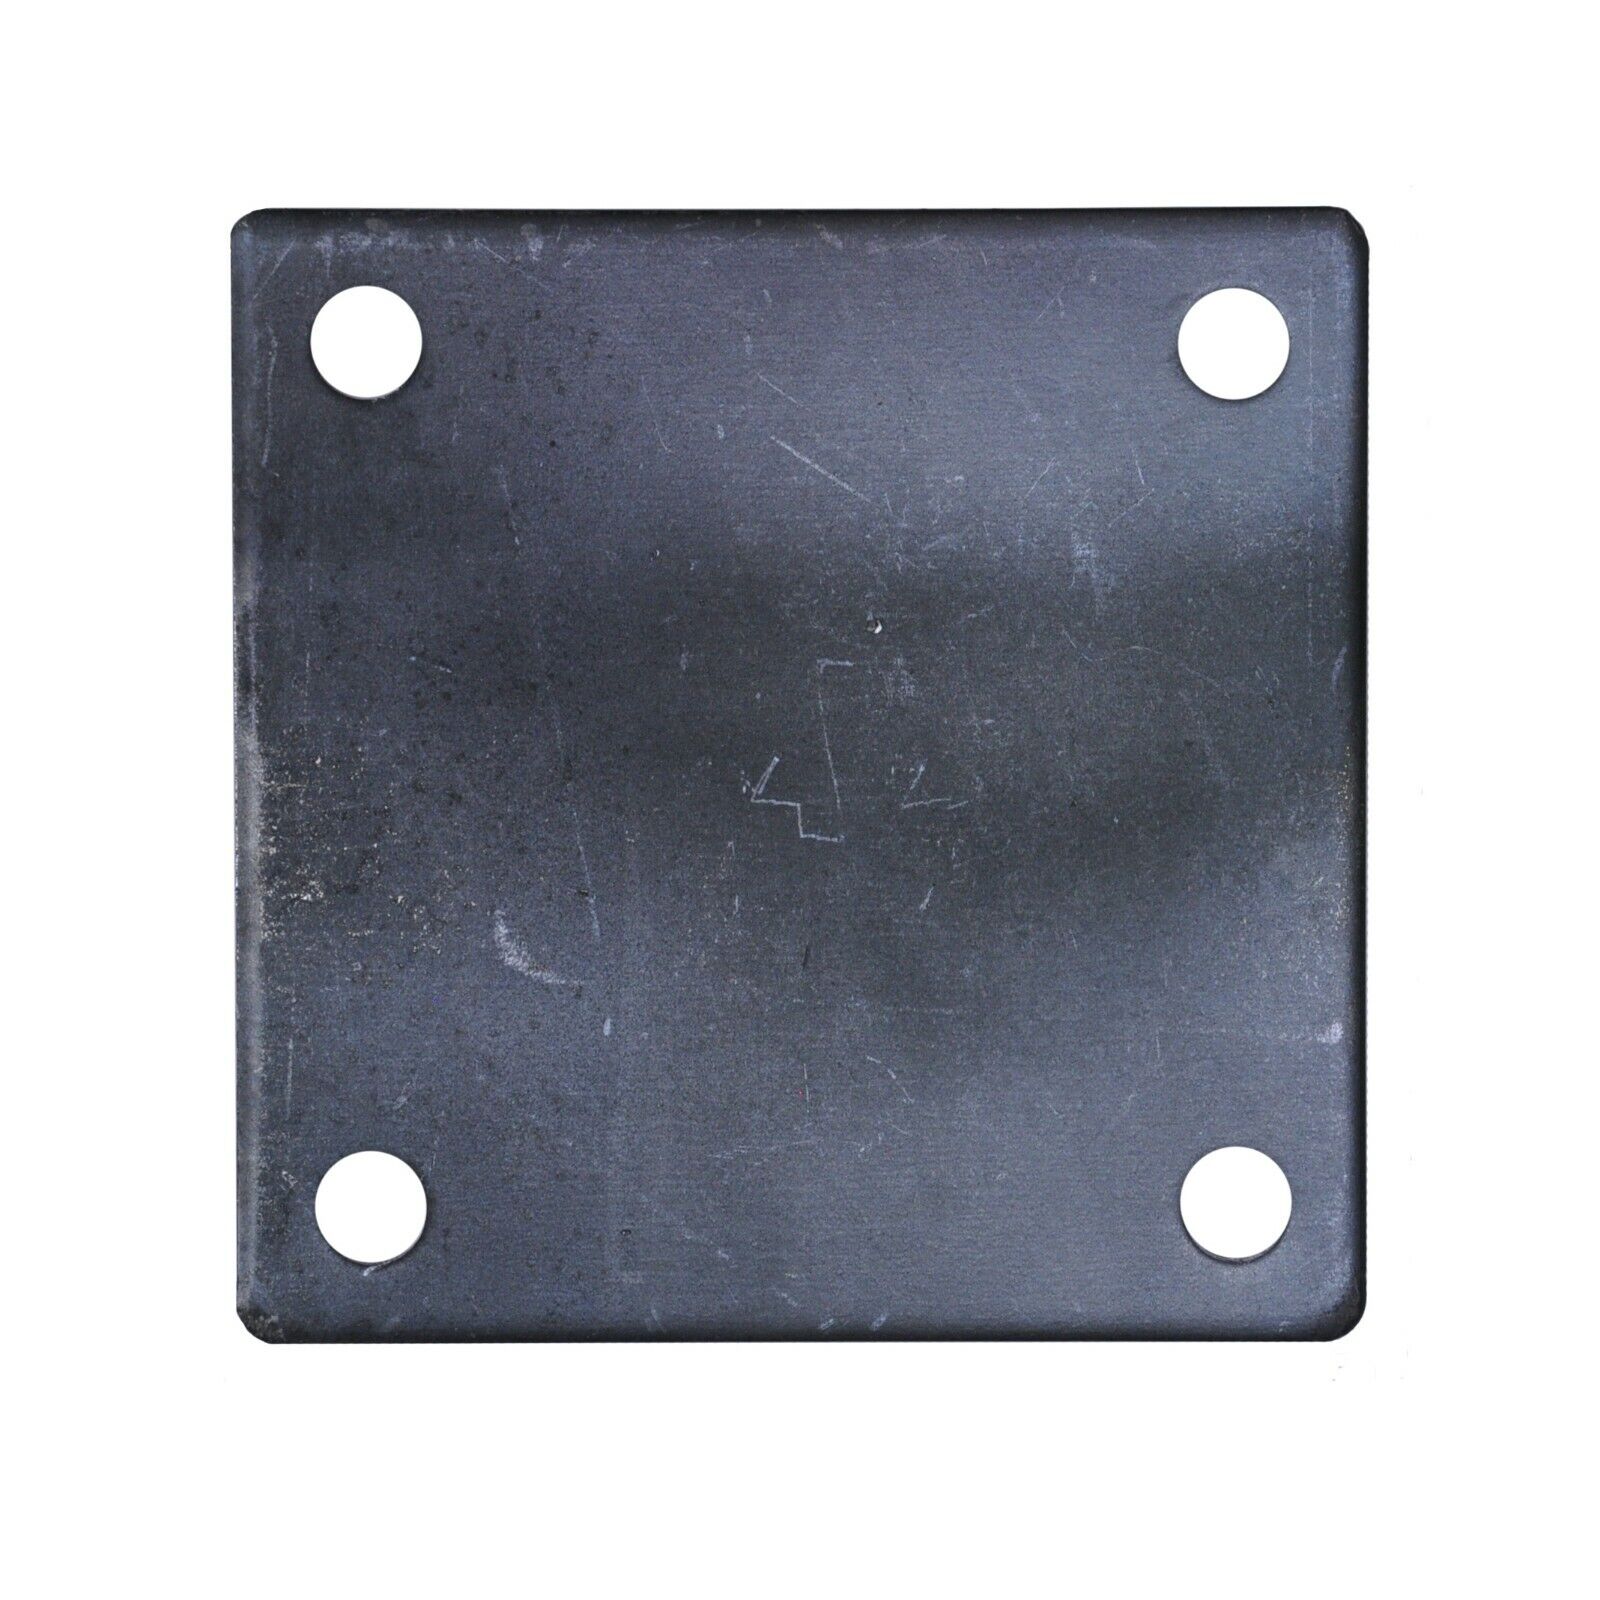 FLAT SQUARE STEEL METAL BASE PLATE 8" x 8" x 1/4" THICKNESS 3/8" HOLE | QTY 4 Pro Gate Supply Does Not Apply